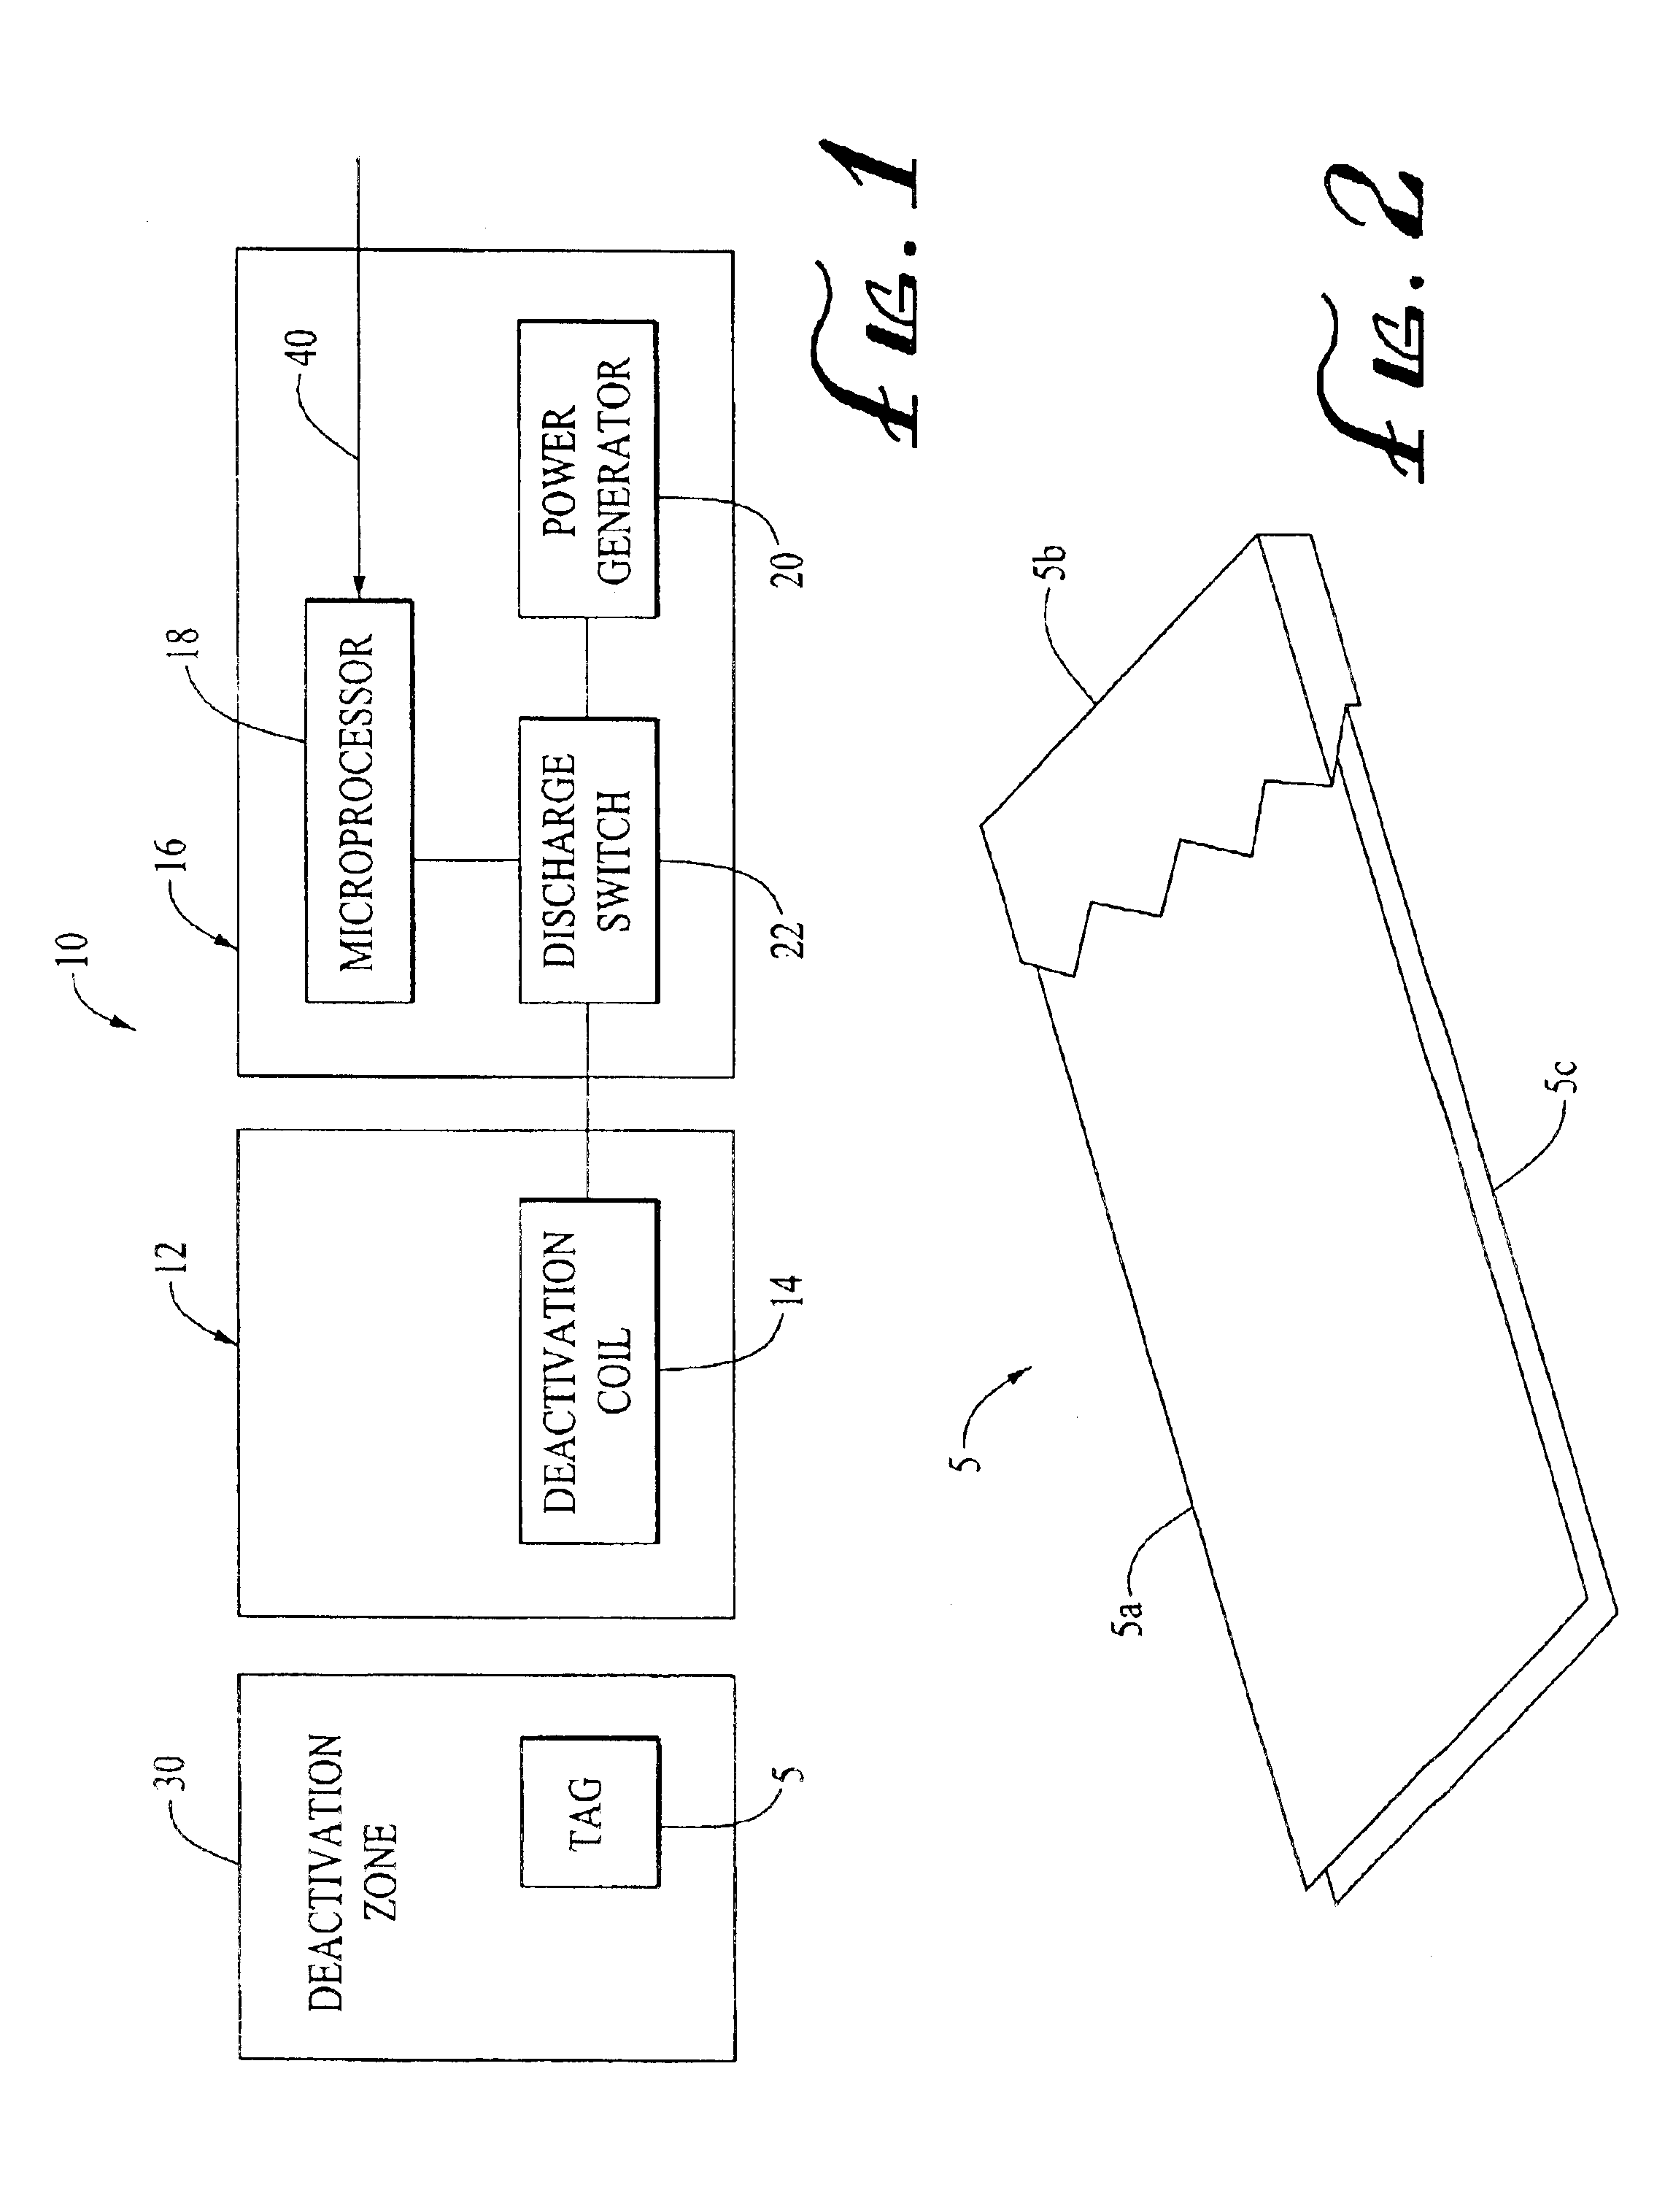 Systems and methods for data reading and EAS tag sensing and deactivating at retail checkout